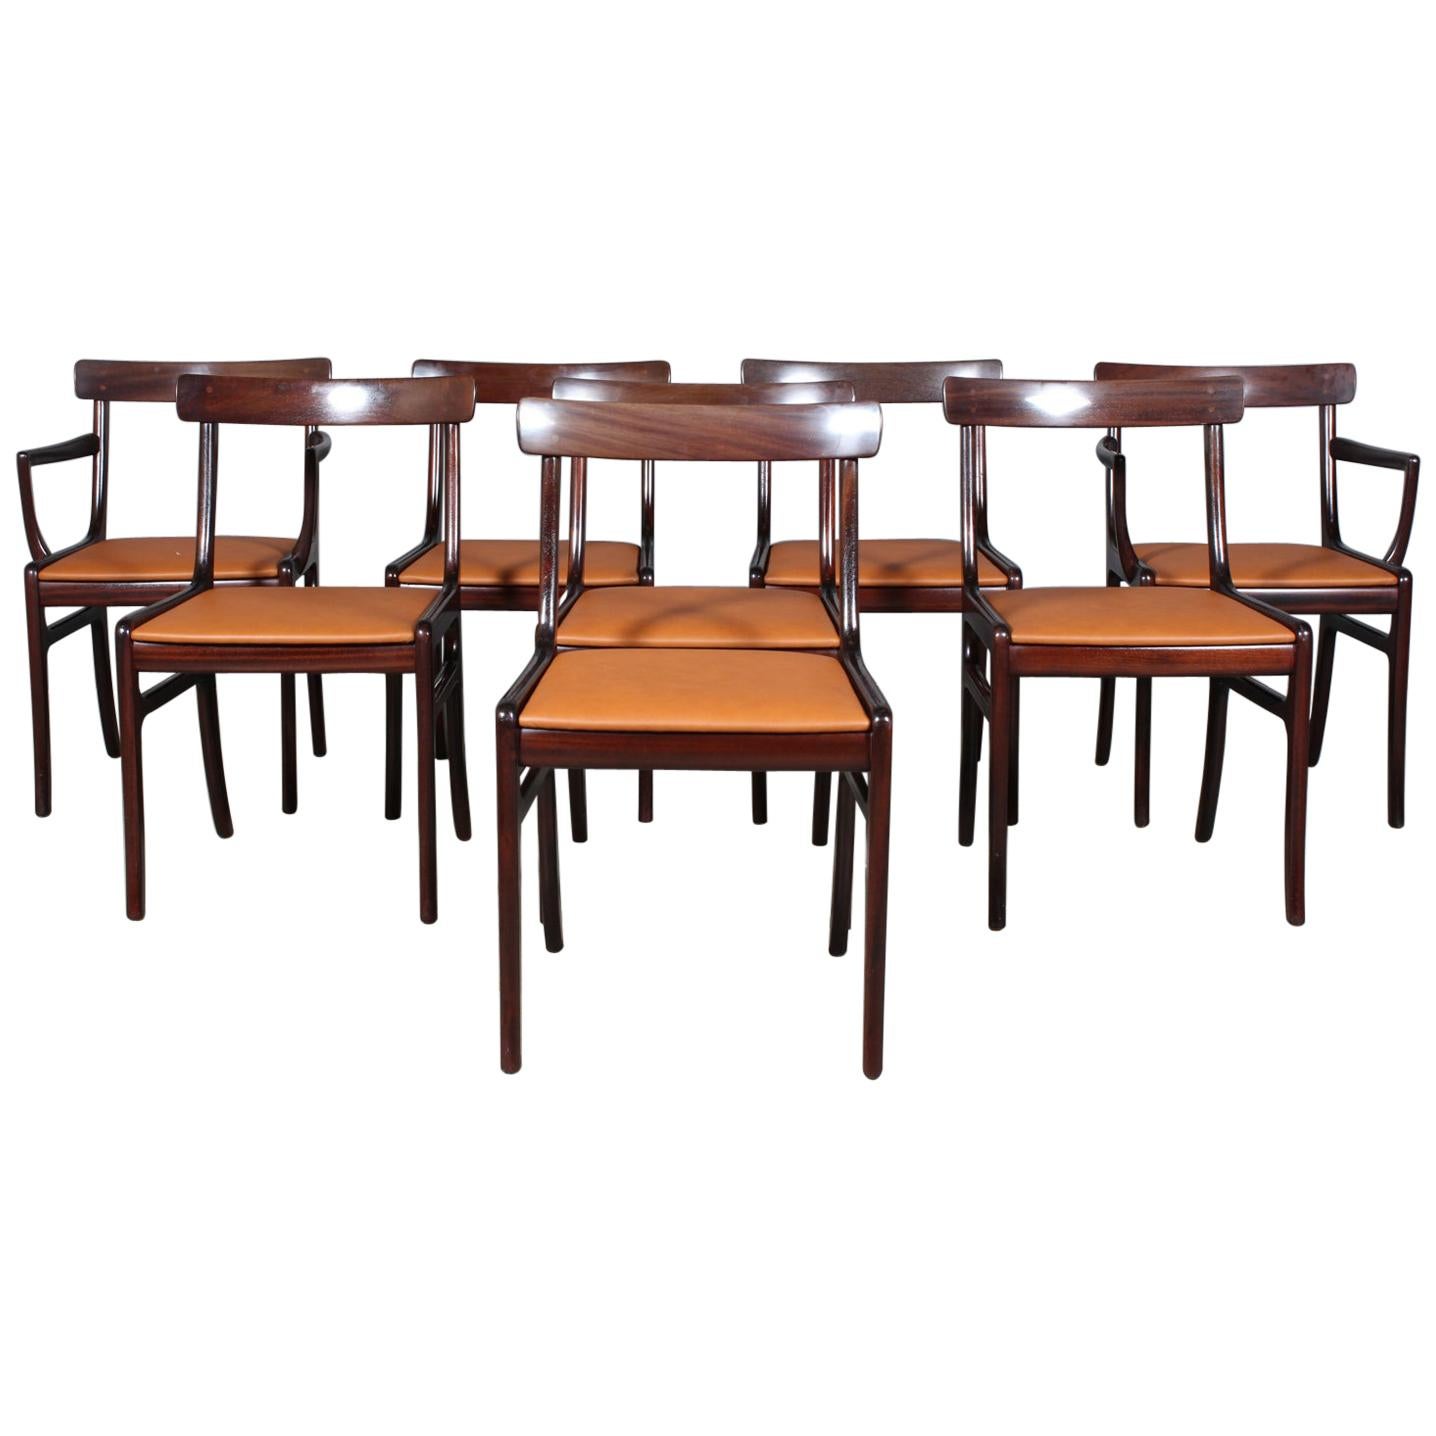 Ole Wanscher Eight Dining Chairs, Model PJ112 Semi Aniline Leather, Rungstedlund